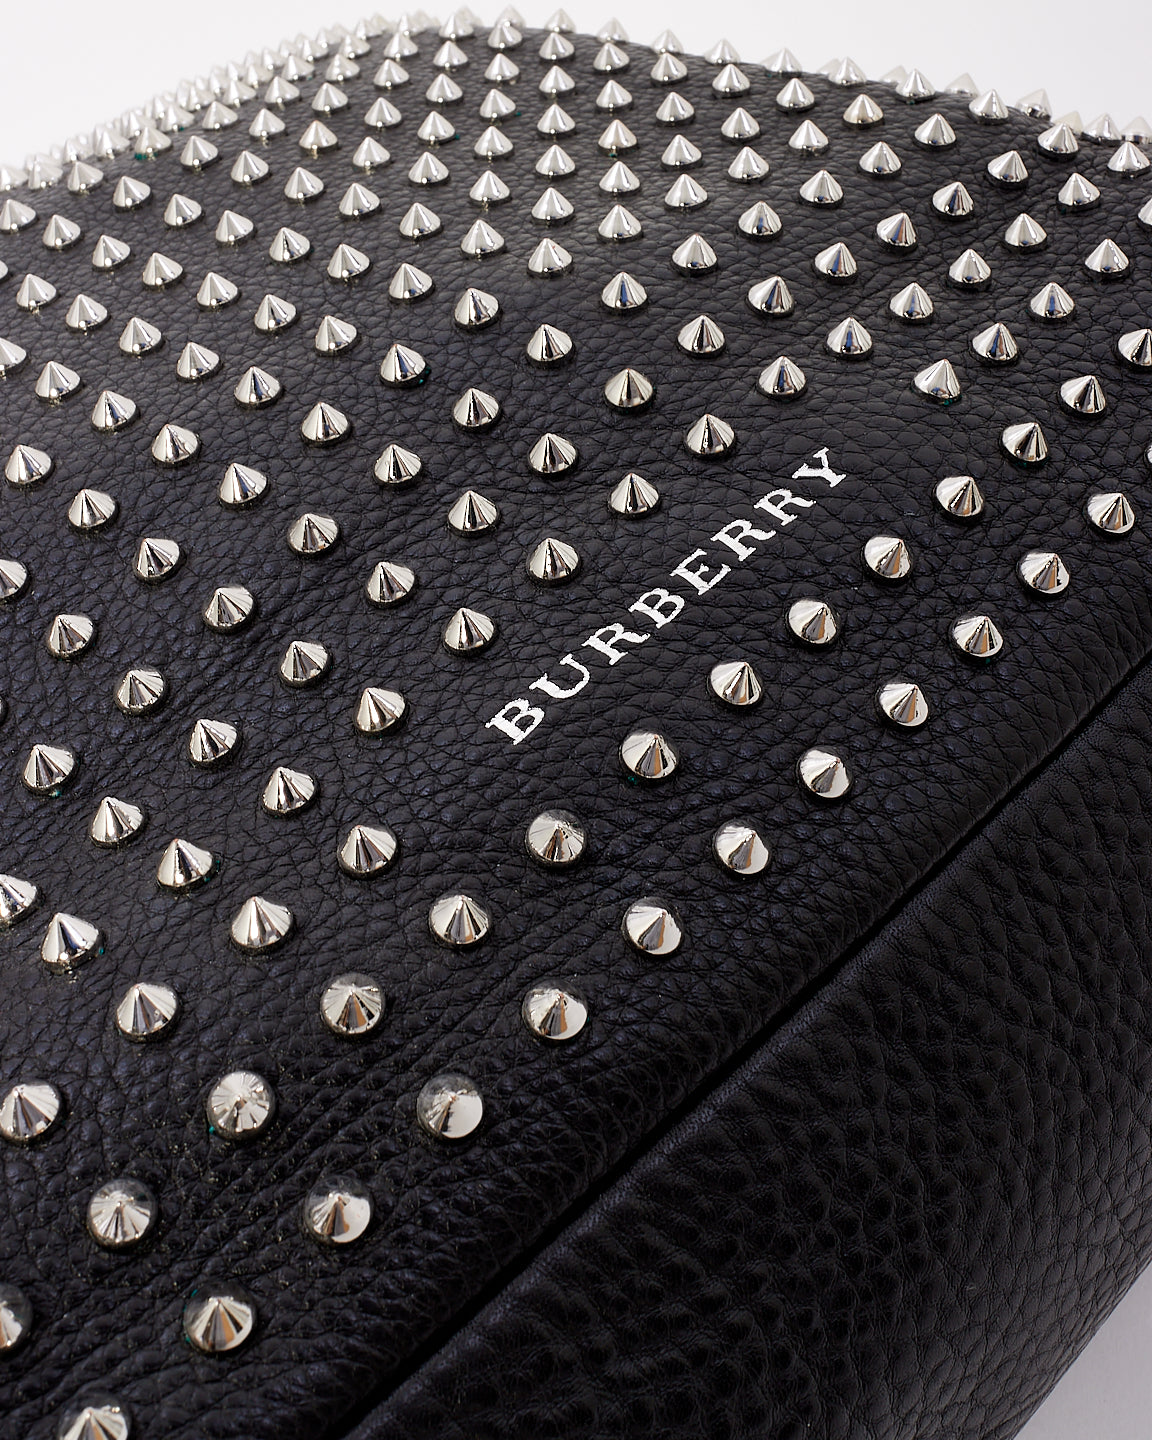 Burberry Black Leather Hobo Bag with Silver Metal Studs